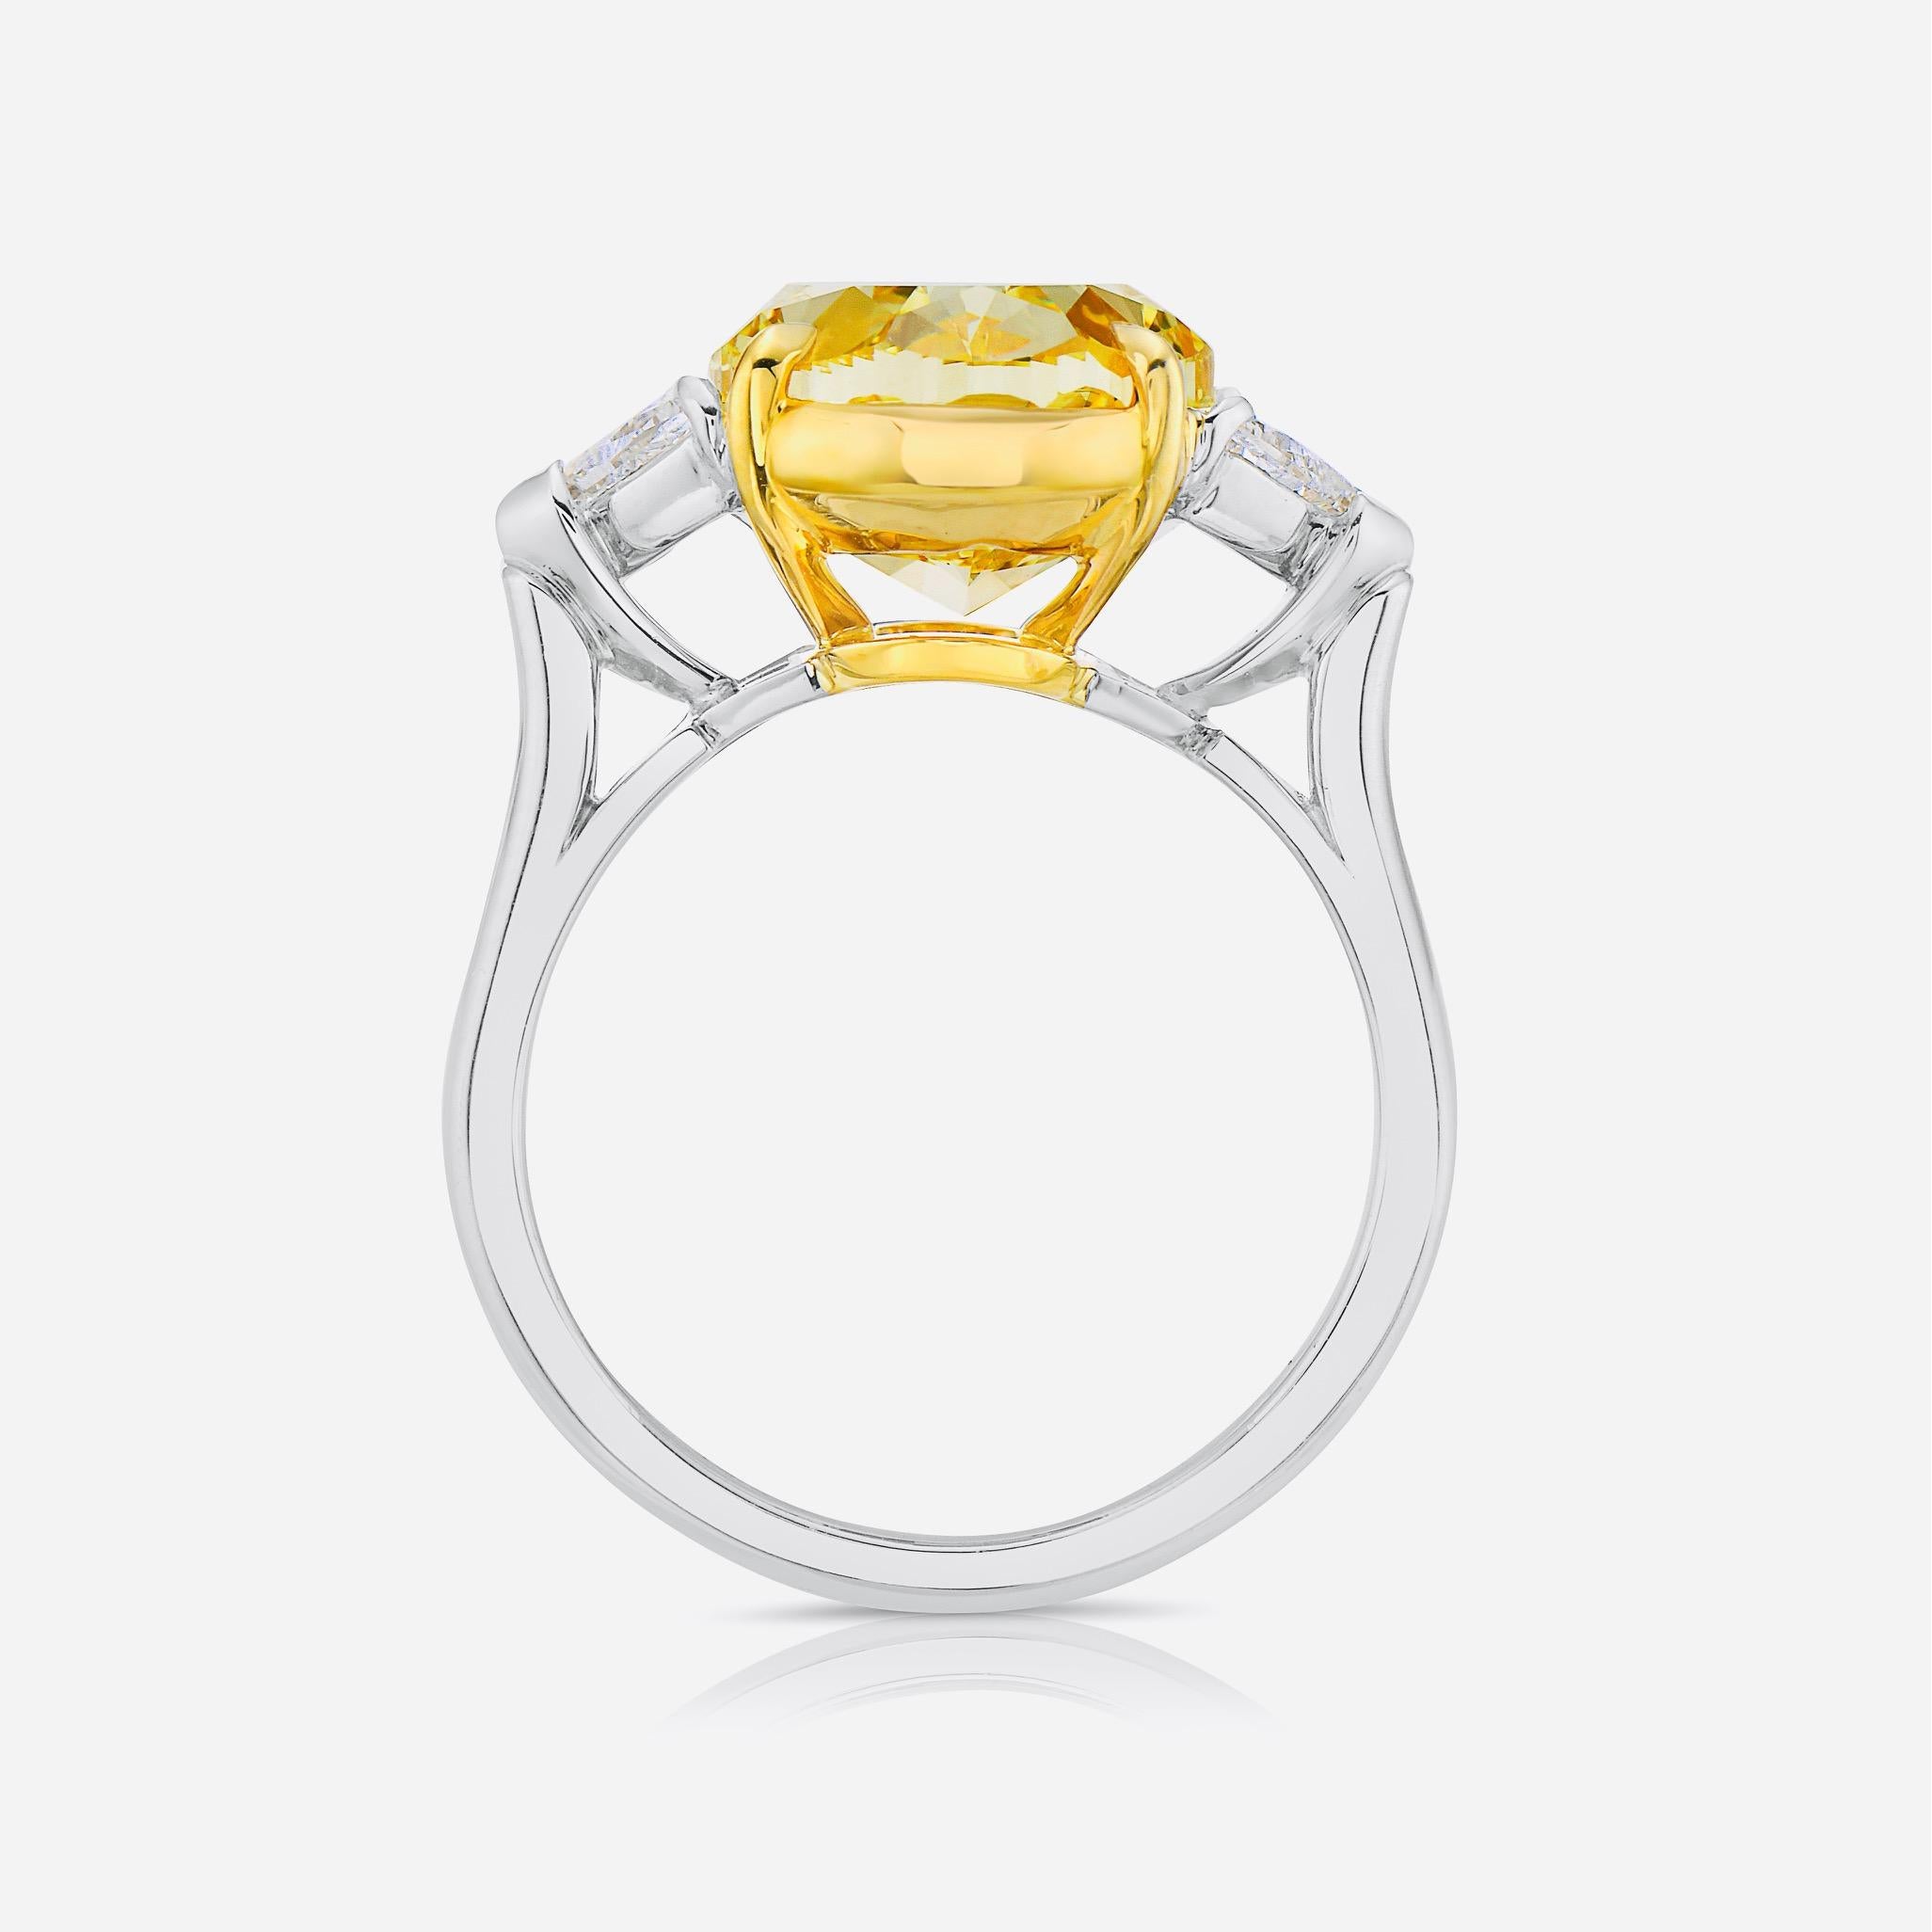 Oval Cut Emilio Jewelry GIA Certified 8.00 Carat Oval Fancy Intense Yellow Diamond Ring For Sale